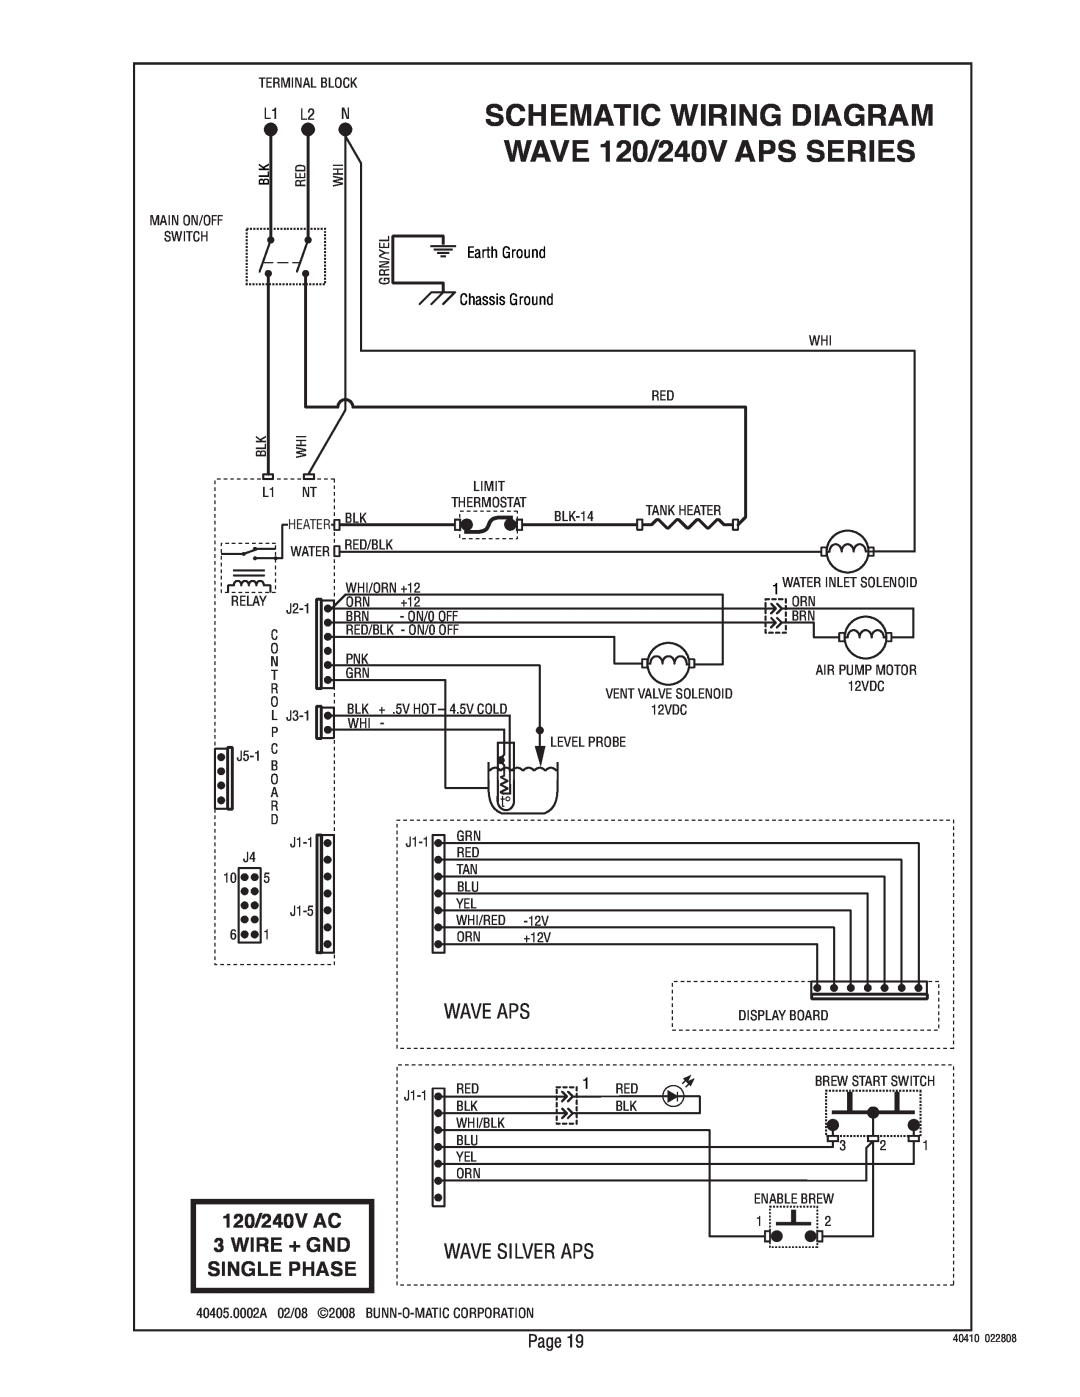 Bunn 40410.0000G Schematic Wiring Diagram, WAVE 120/240V APS SERIES, 120/240V AC, Wire + Gnd, Single Phase, Wave Aps 